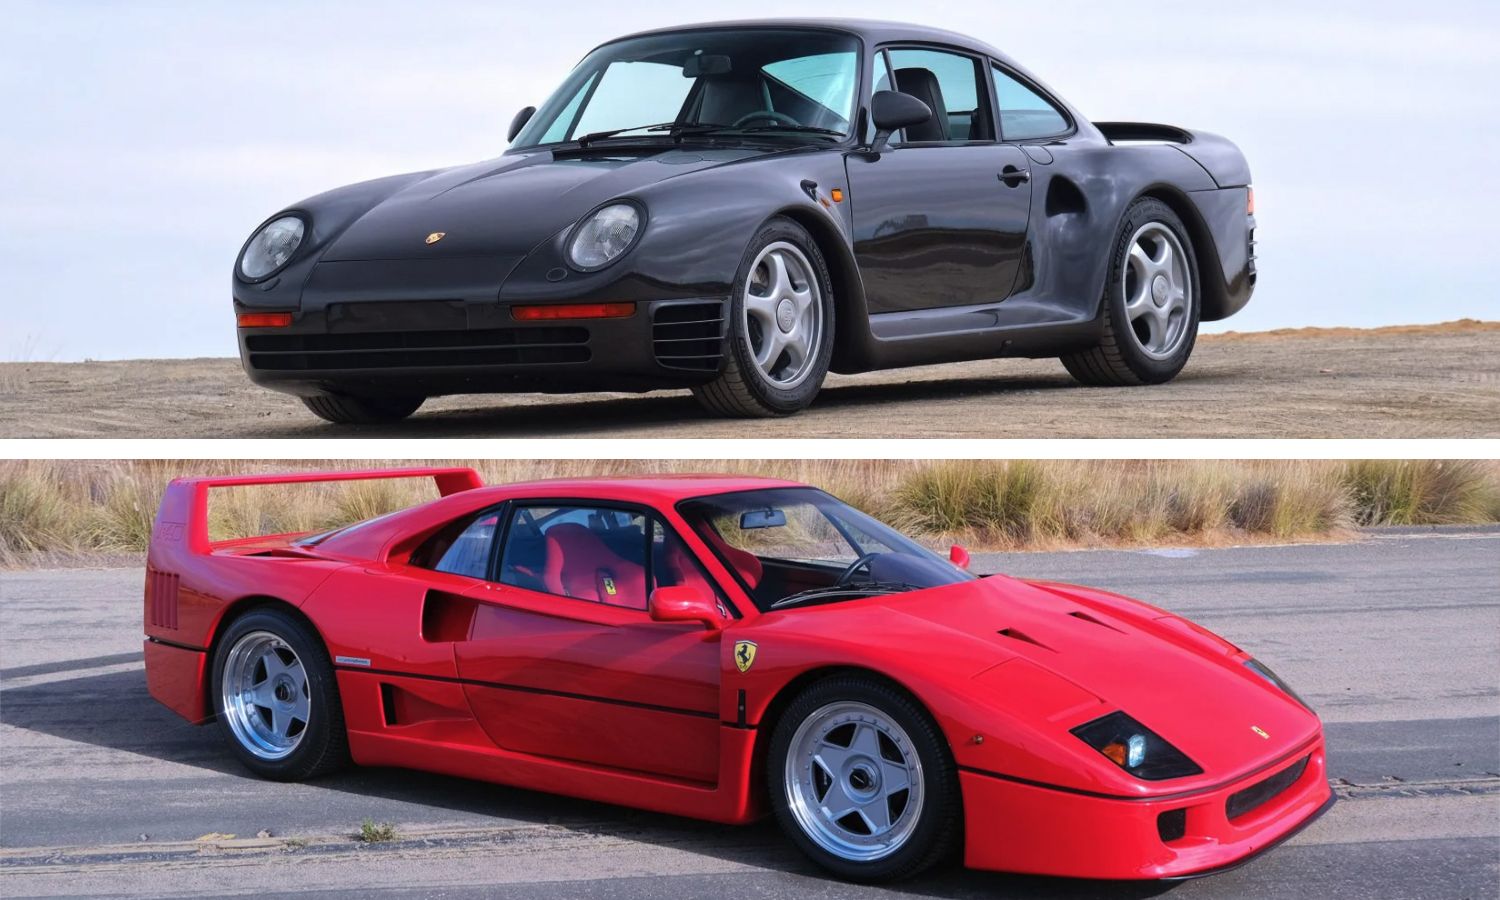 19 Porsche 959 Or 1992 Ferrari F40 Both Are Up For Auction